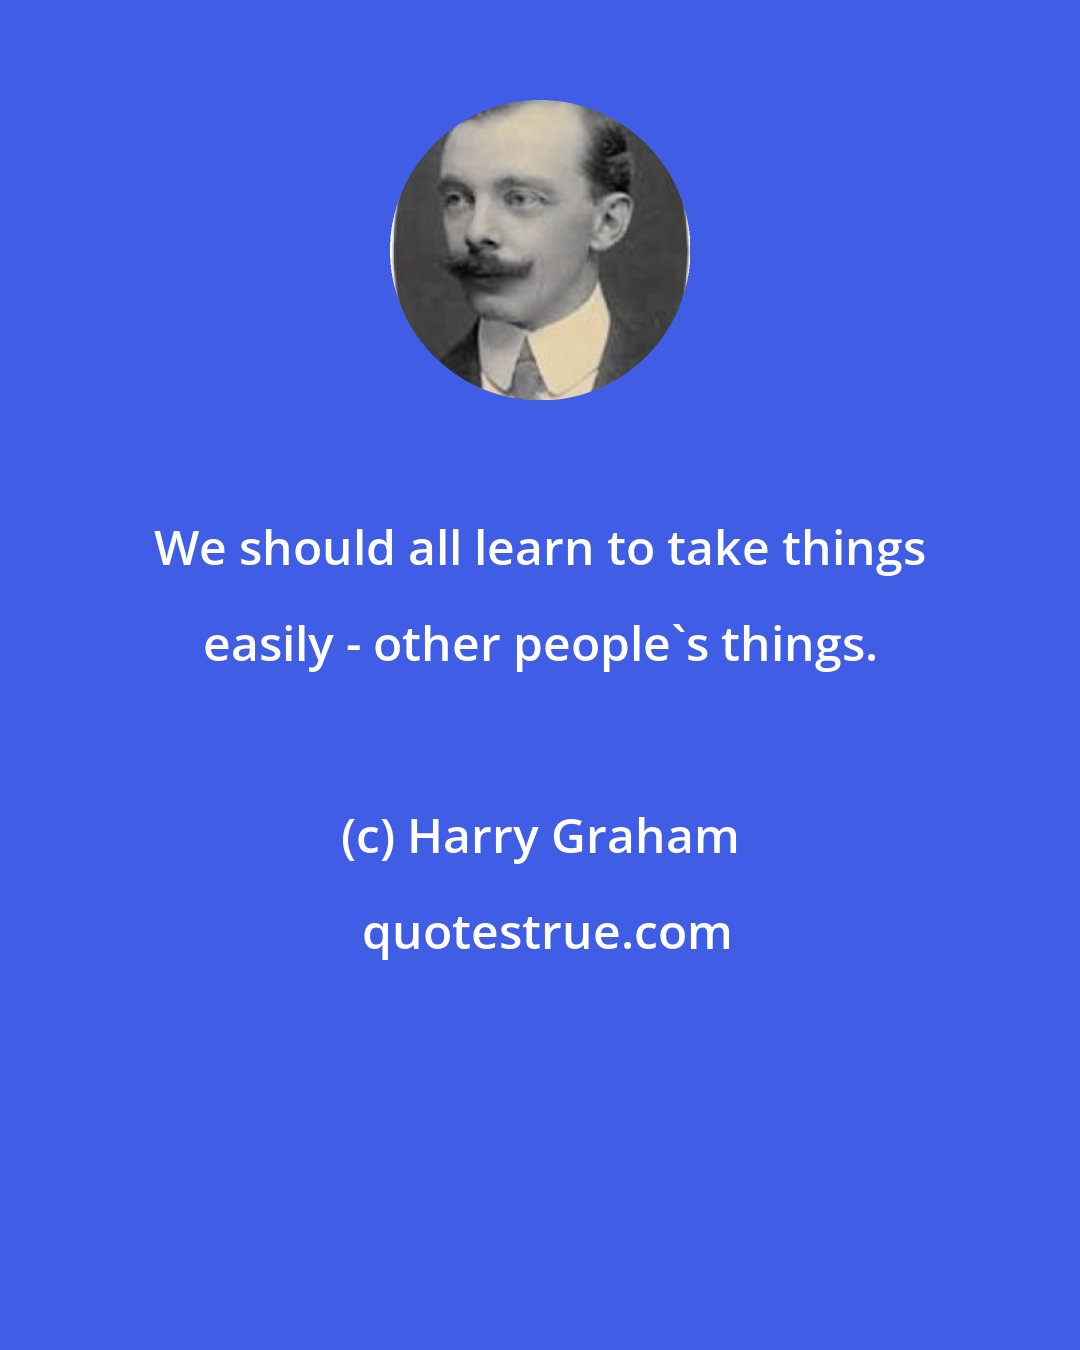 Harry Graham: We should all learn to take things easily - other people's things.